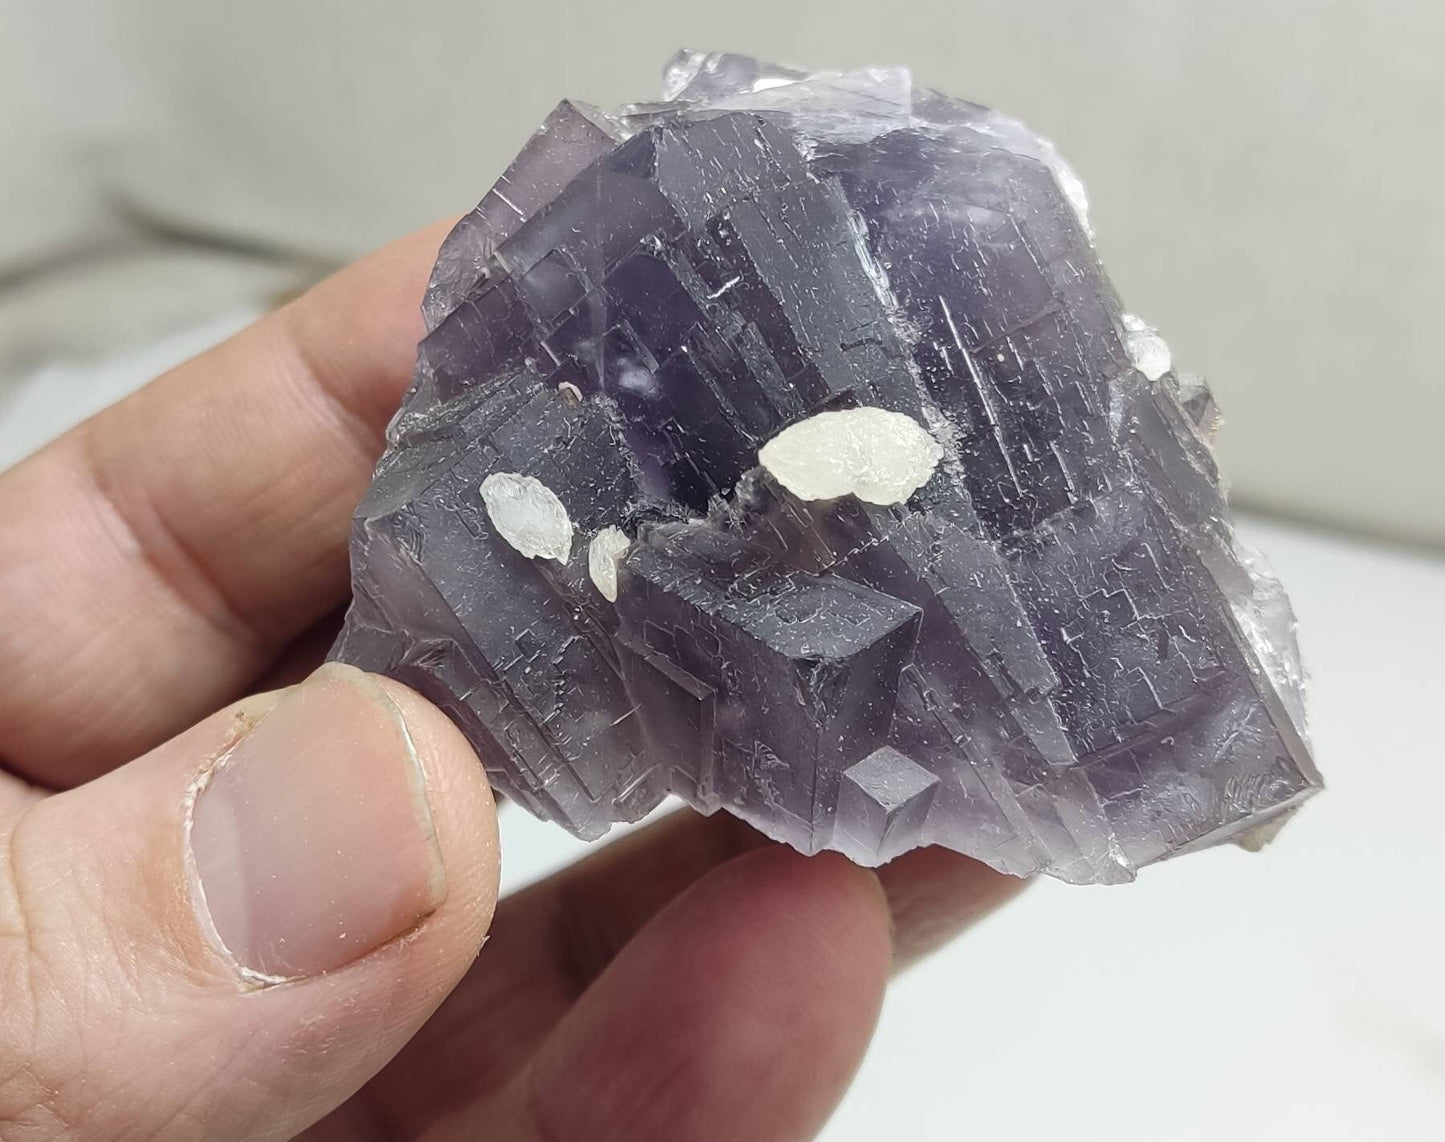 An amazing Single beautiful specimen of grey/purple fluorite with calcite crystals 150 grams